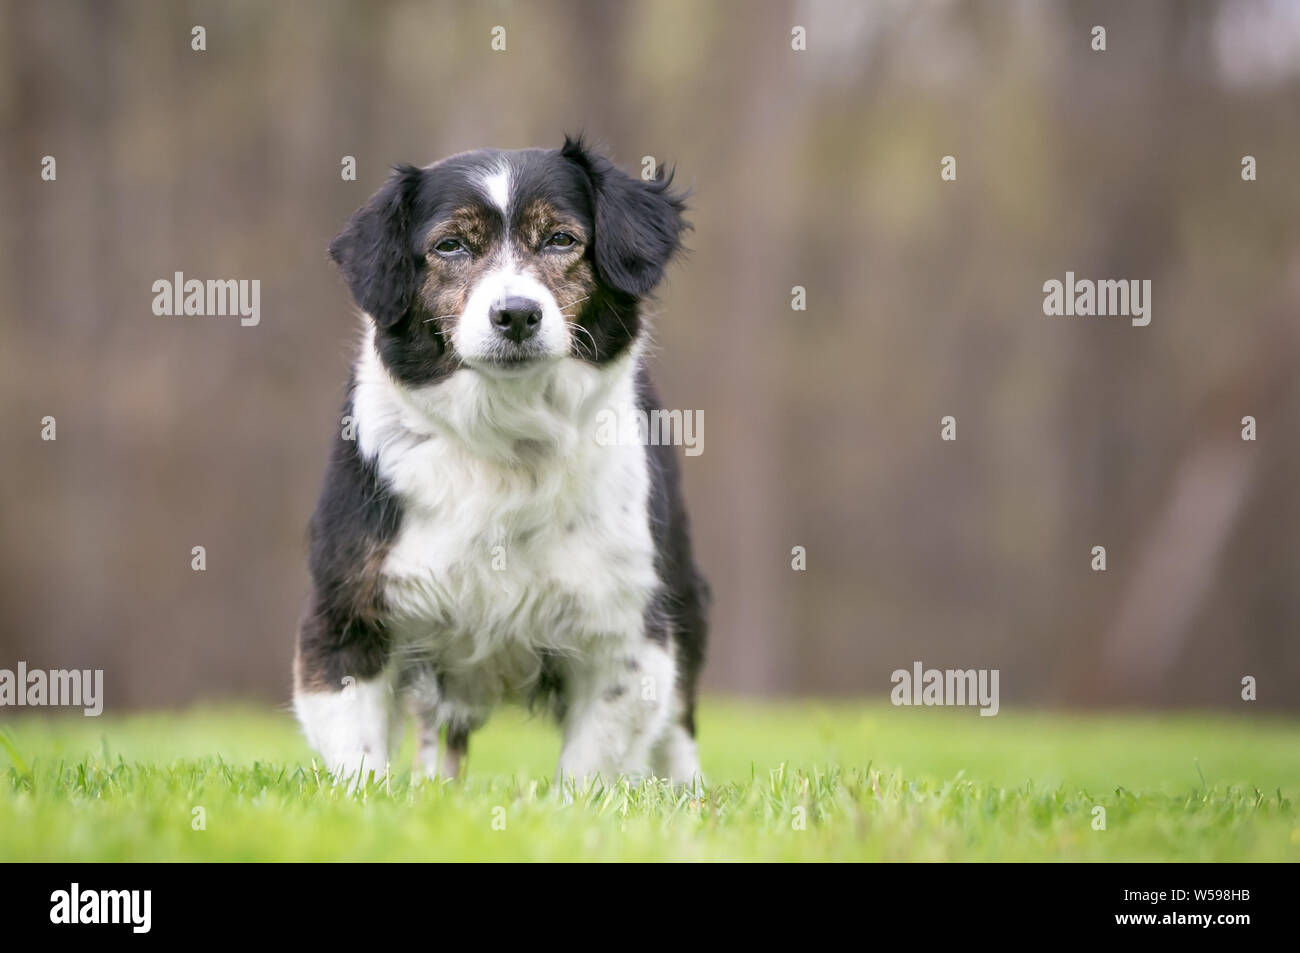 A cute tricolor mixed breed dog with floppy ears standing outdoors Stock  Photo - Alamy